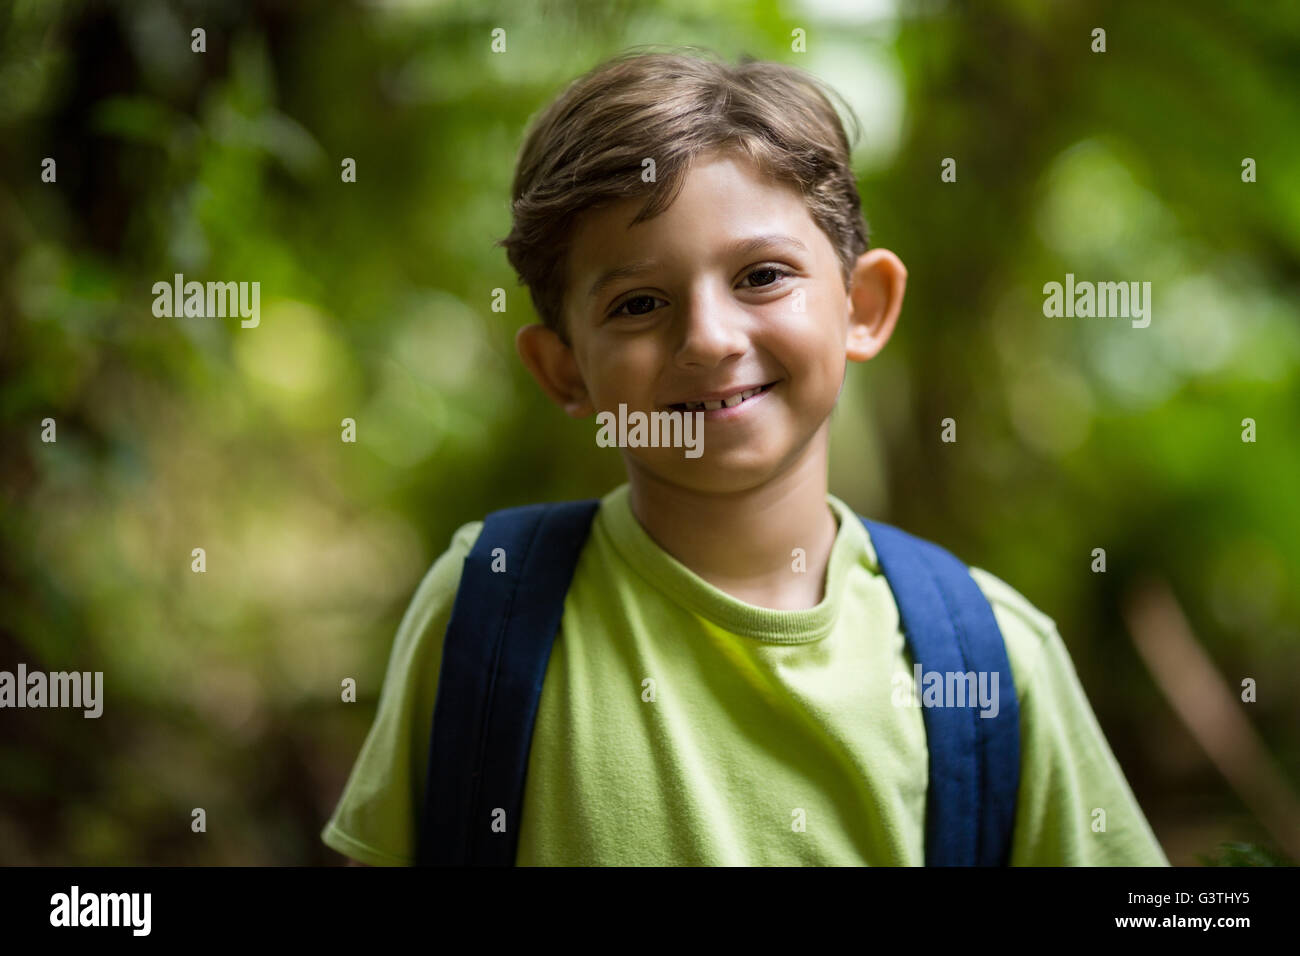 Smiling boy standing in a forest Banque D'Images